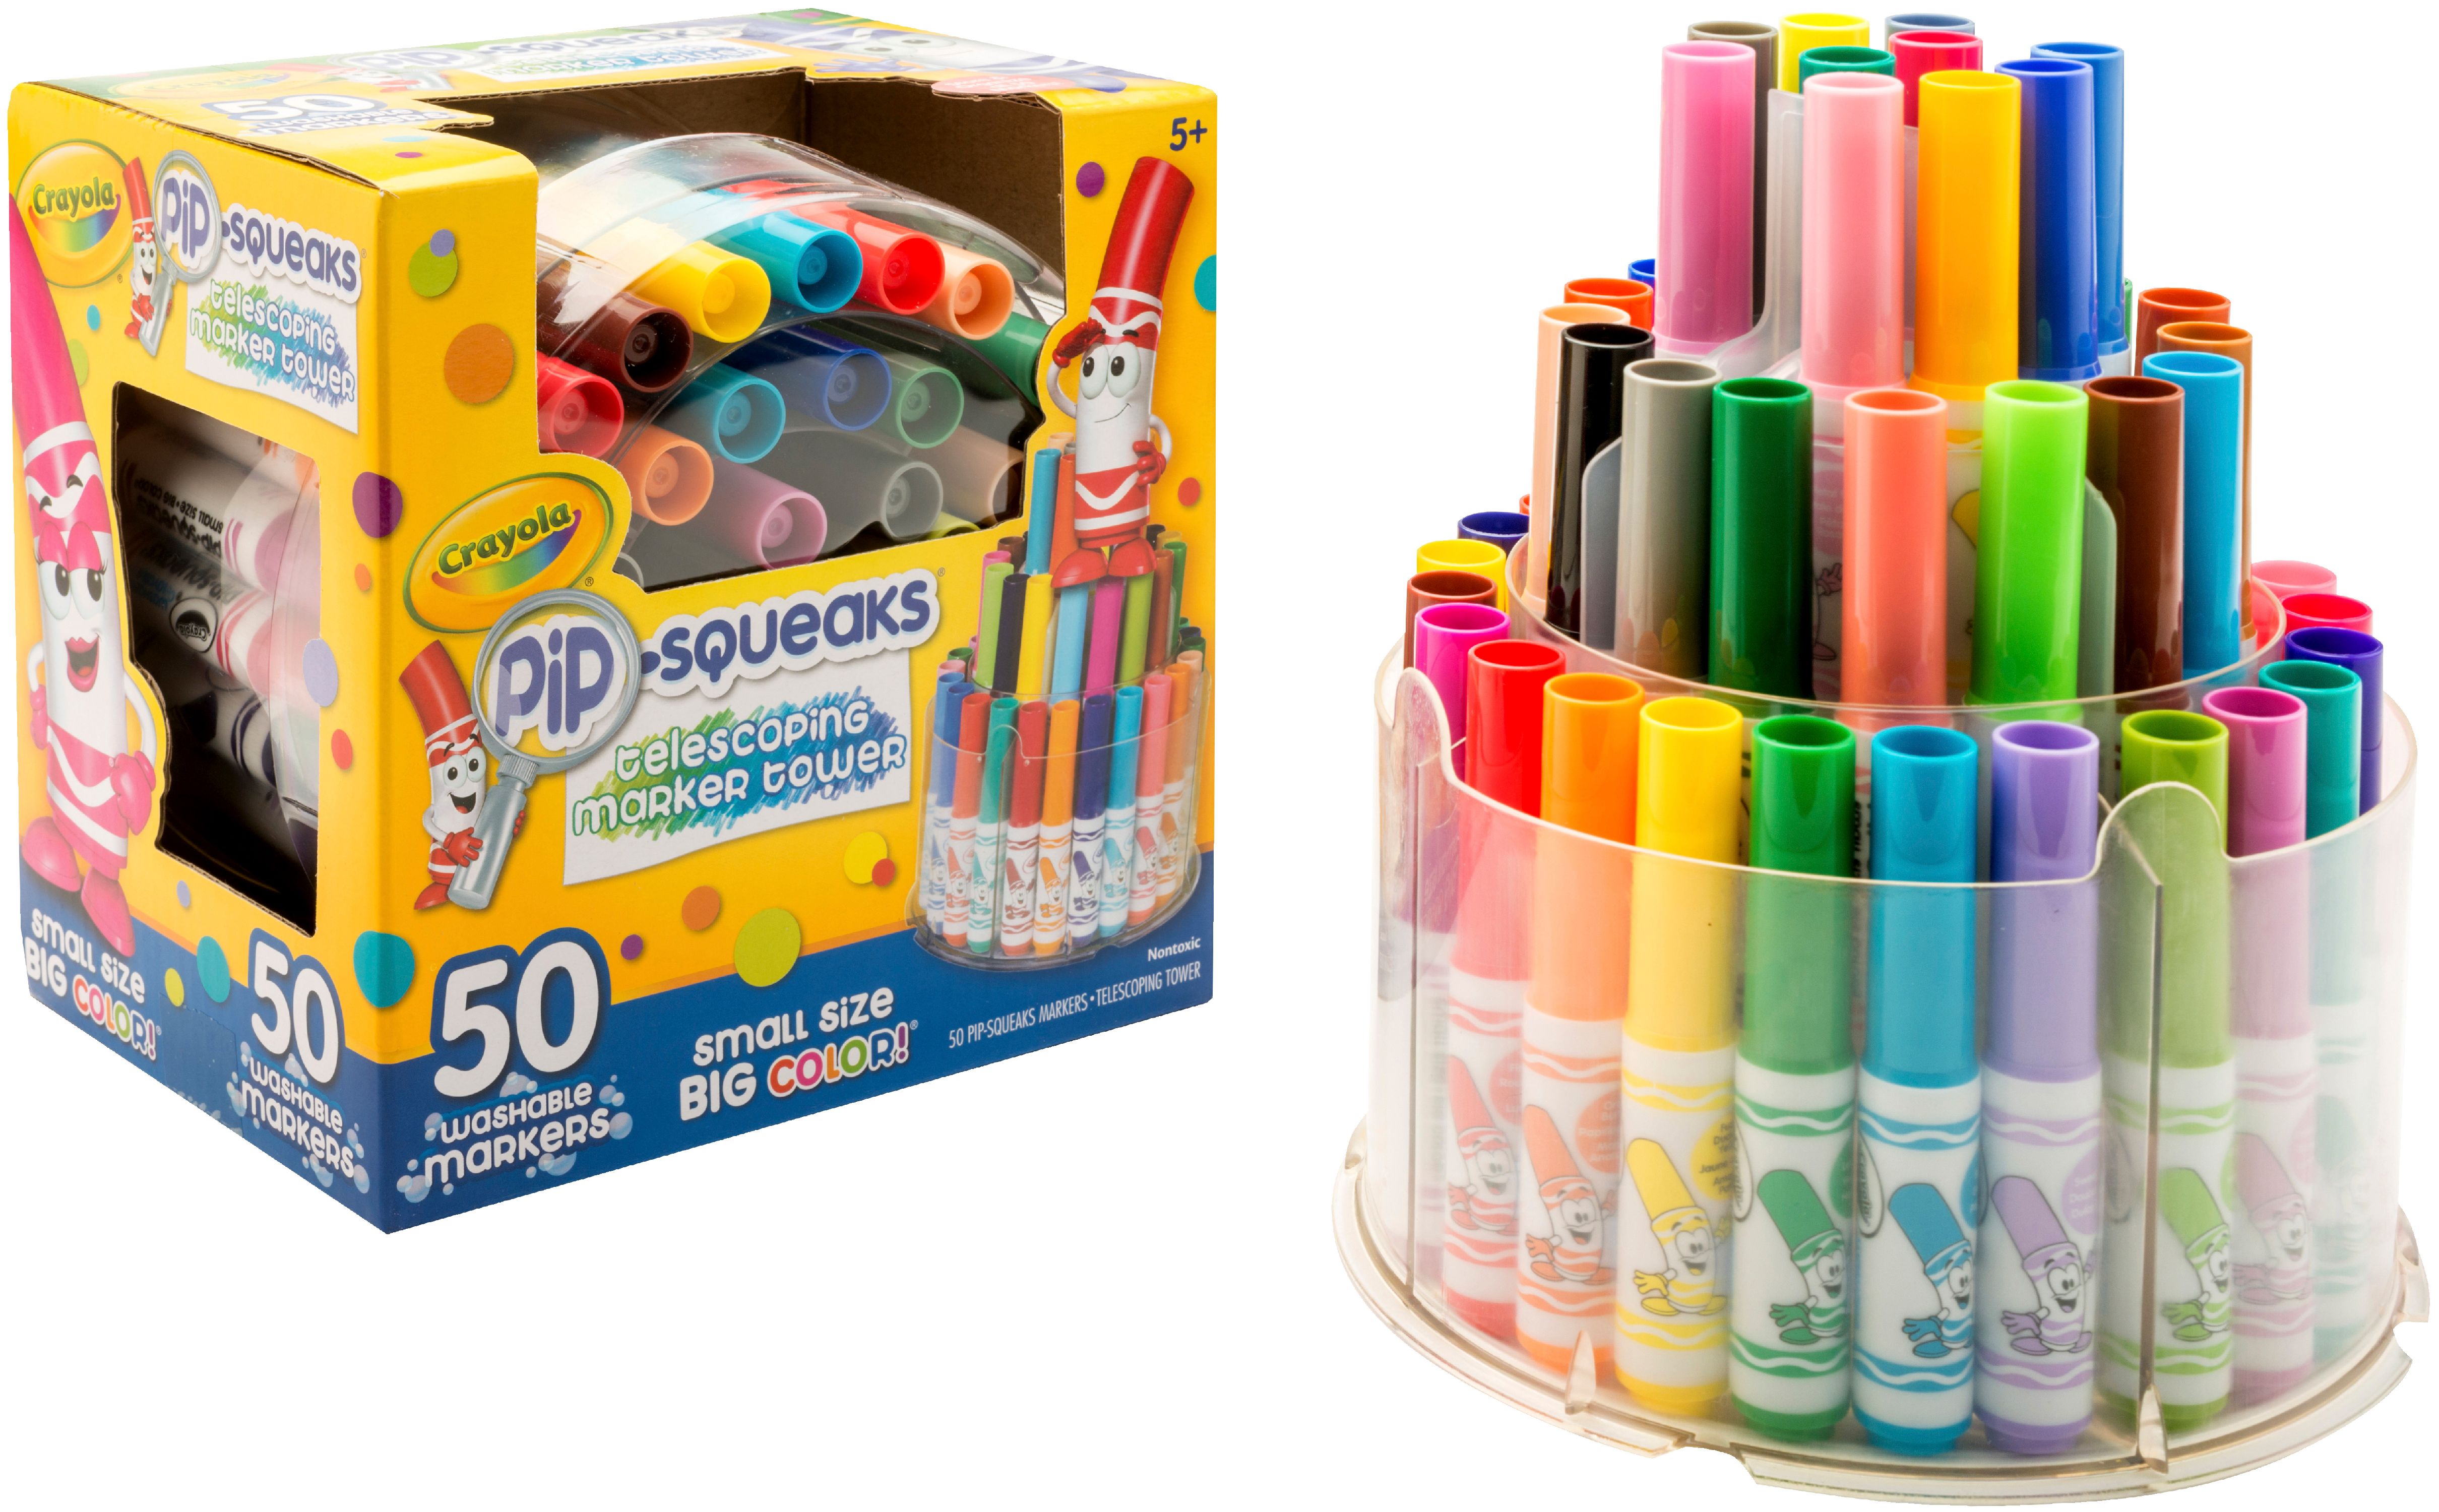 Crayola Pip Squeaks Marker Tower, Assorted Colors, 50 Washable Markers, Toys for Kids - image 3 of 6